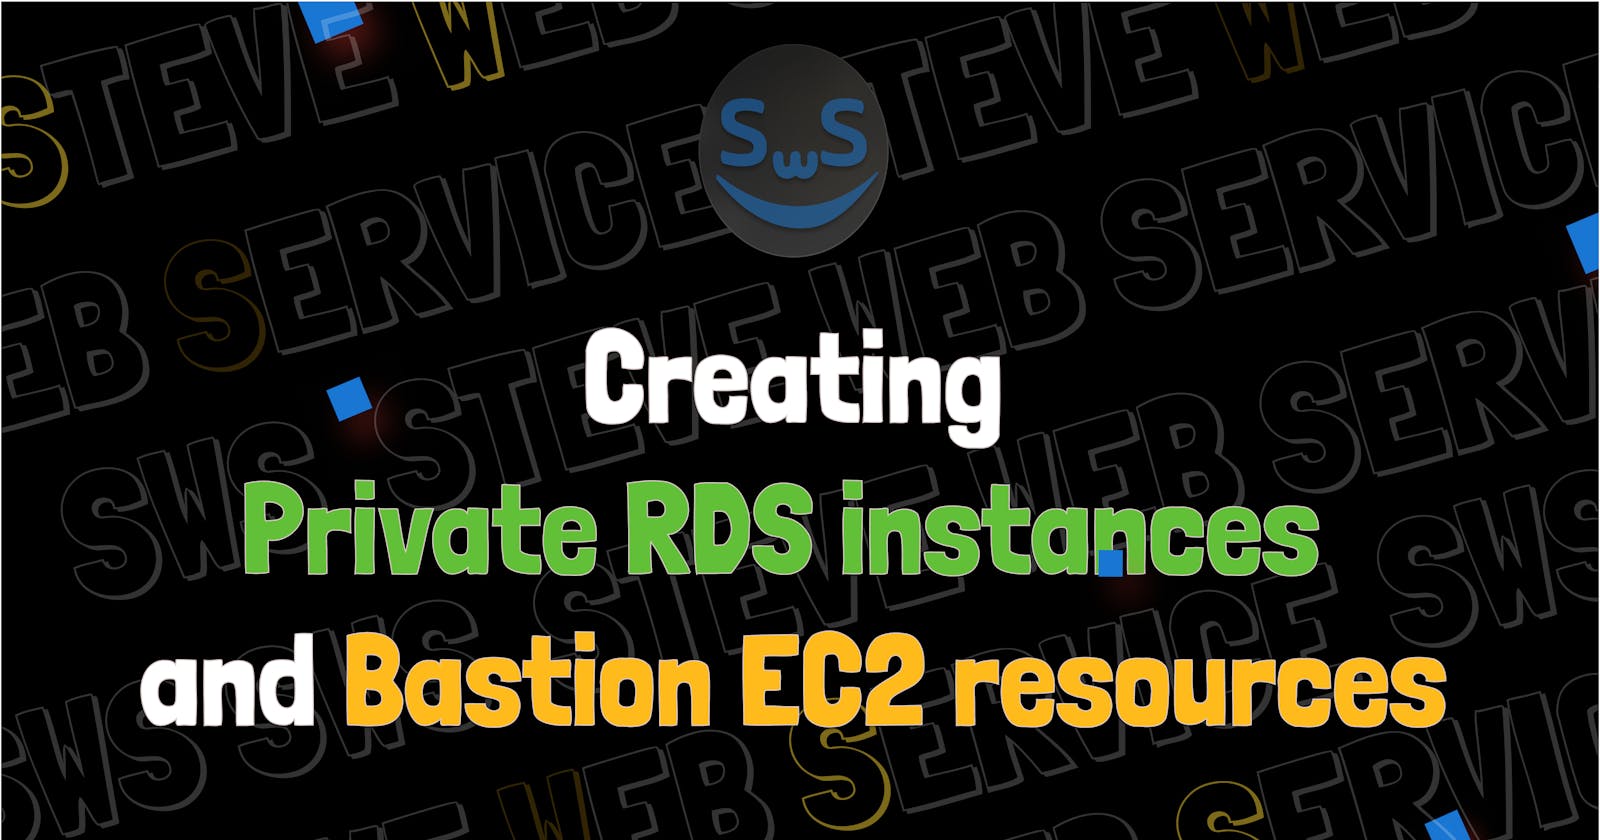 SWS Console: Creating Private RDS instances and Bastion EC2 resources.